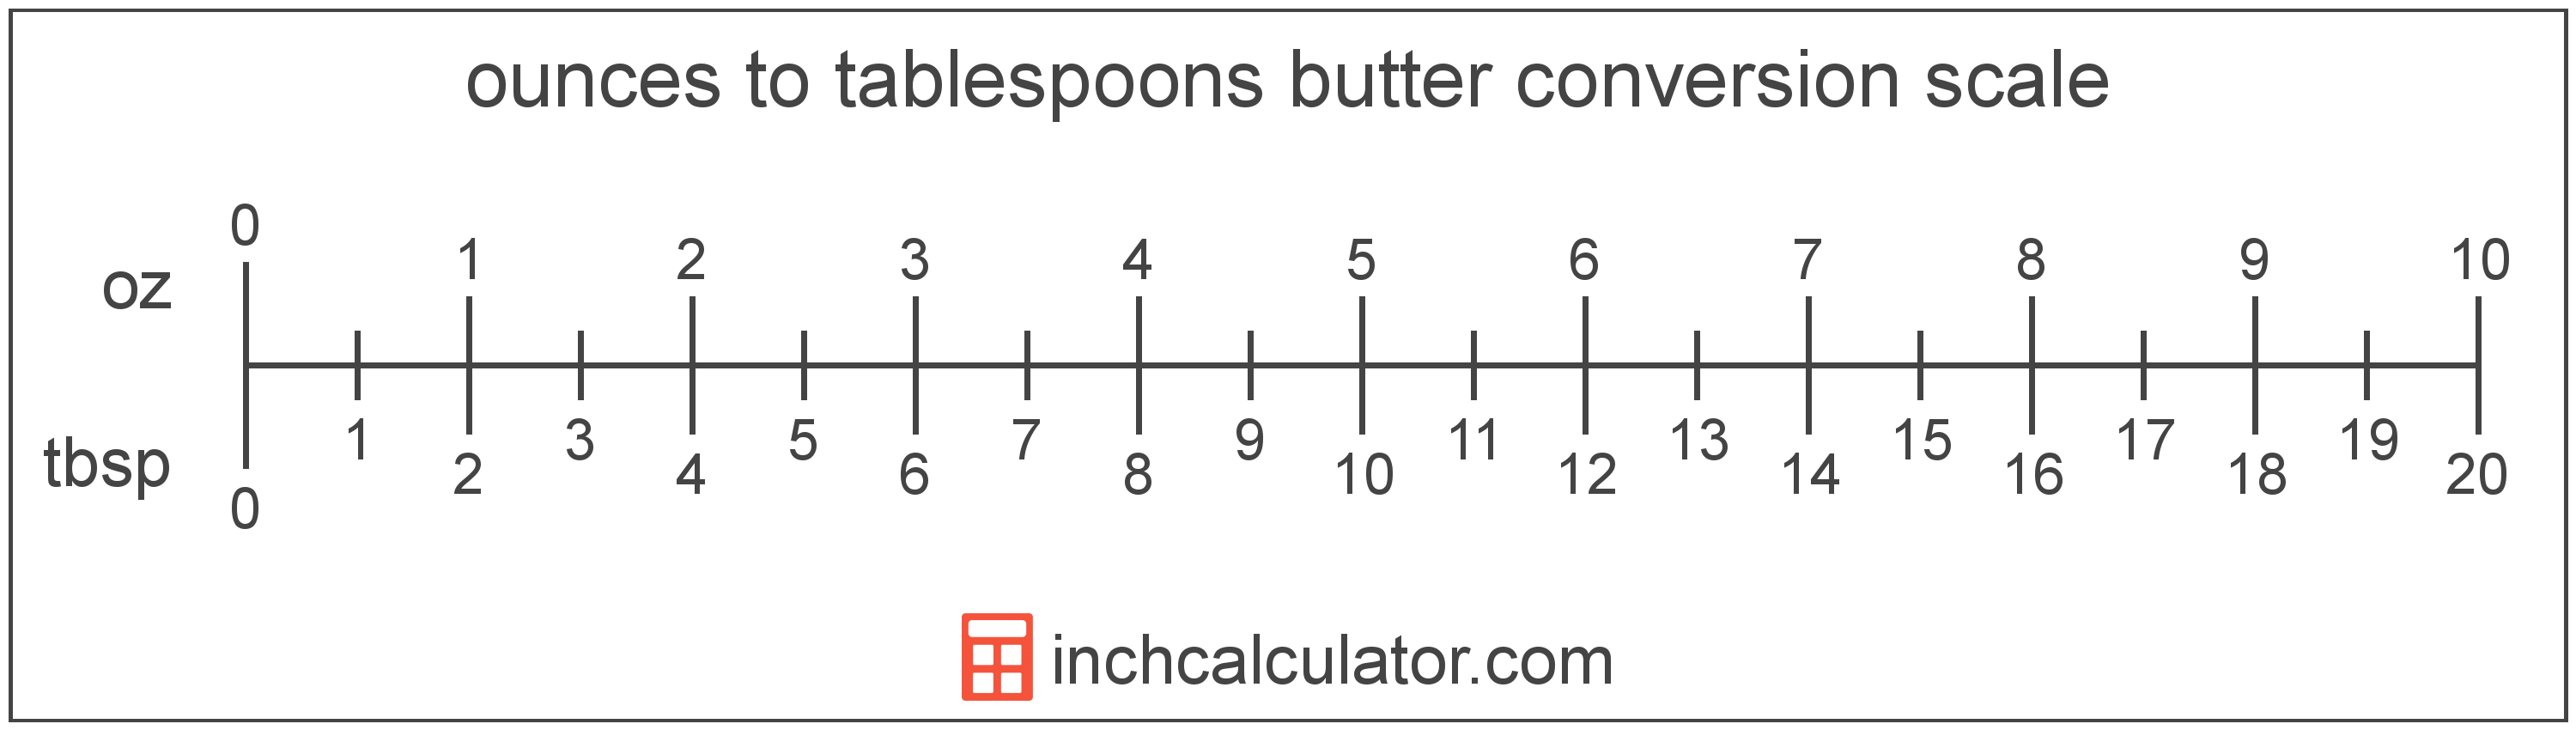 https://www.inchcalculator.com/a/img/unit-conversion/ounce-butter-to-tablespoon-butter-conversion-scale.png